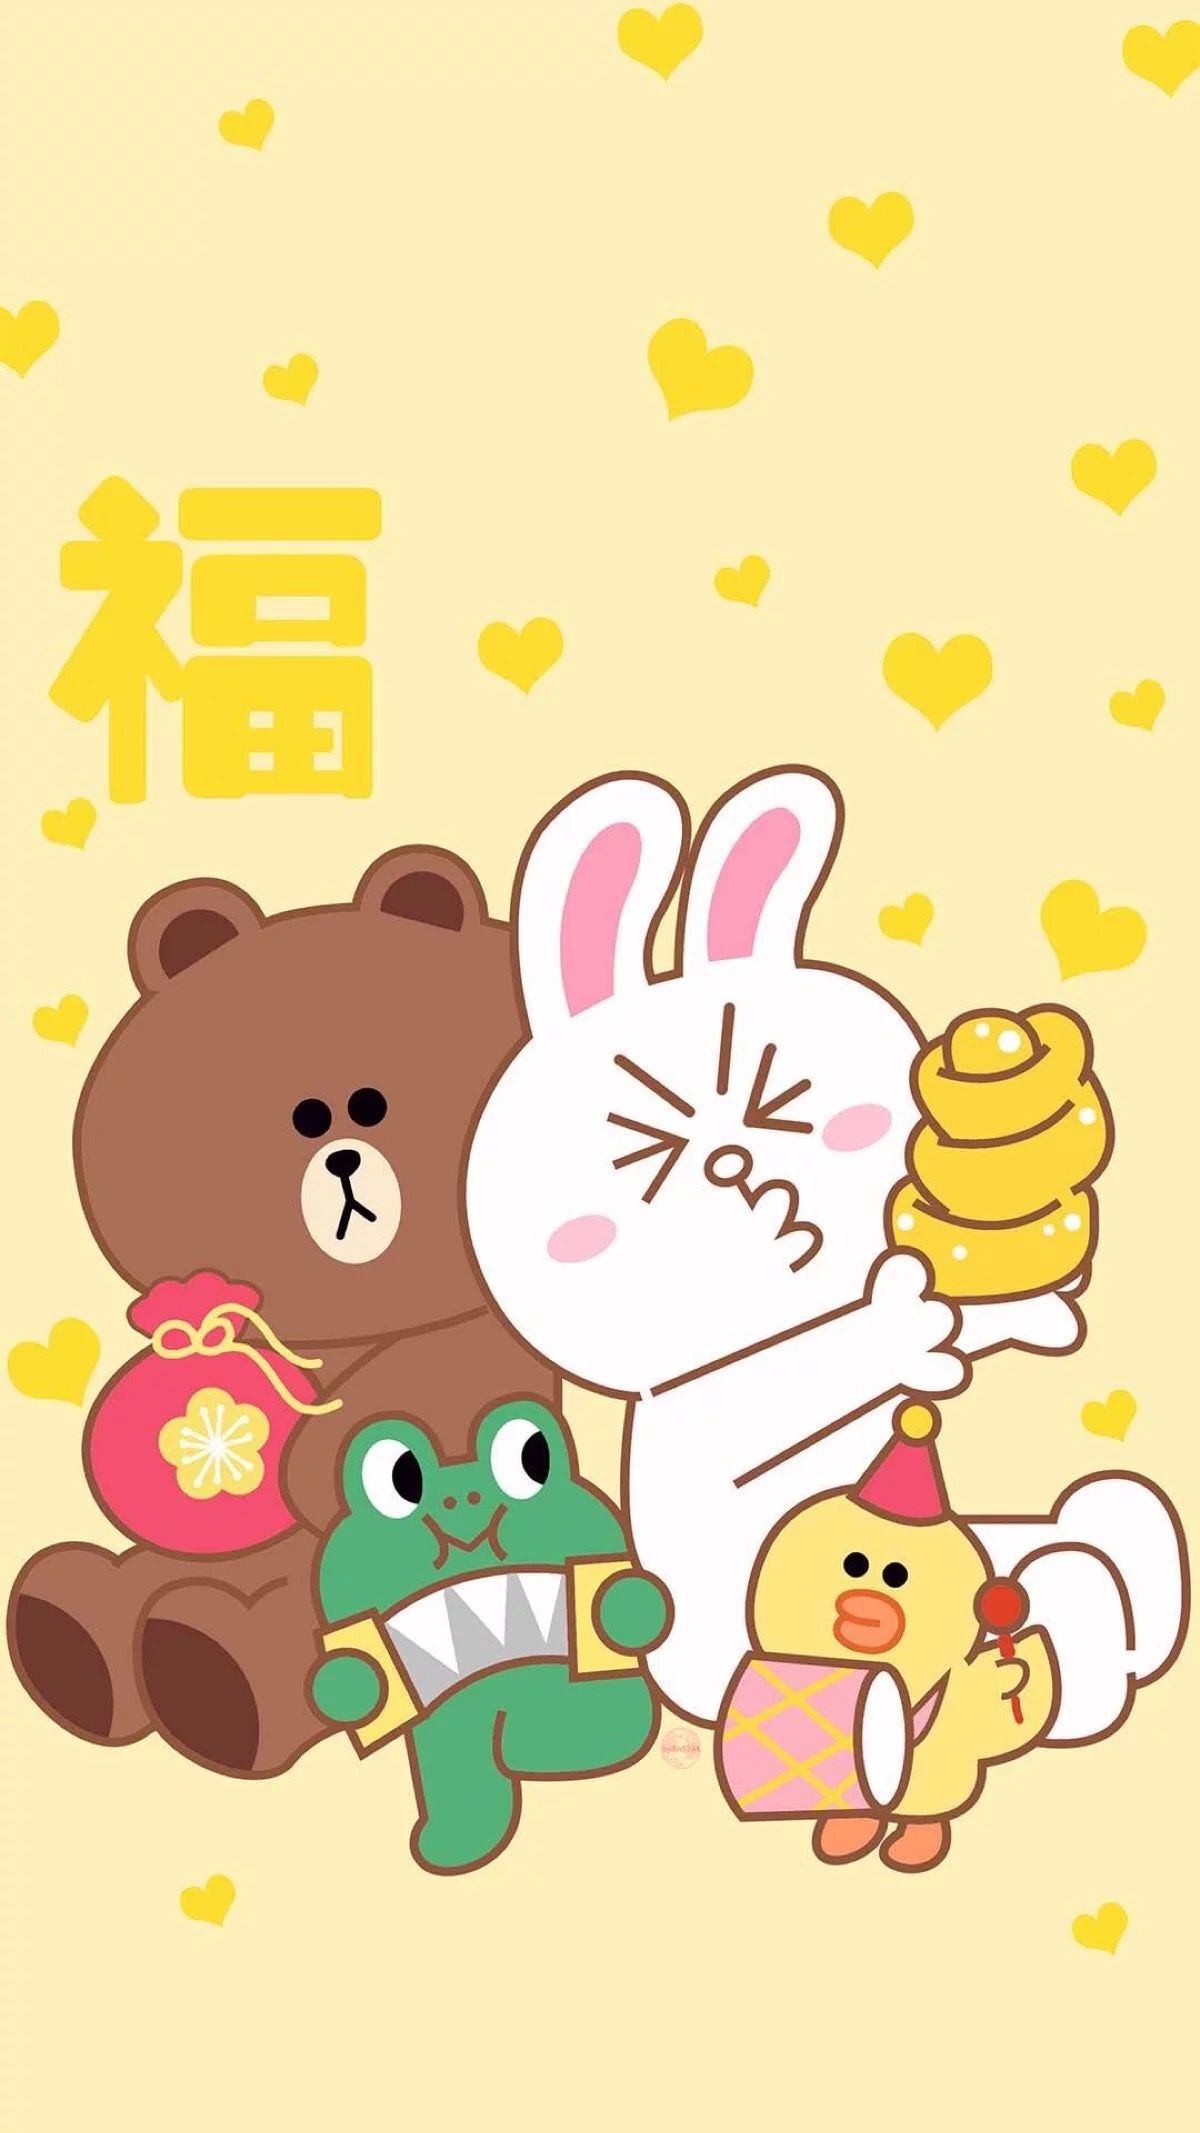 Chinese New Year. Line friends, Line sticker, Doodle illustration